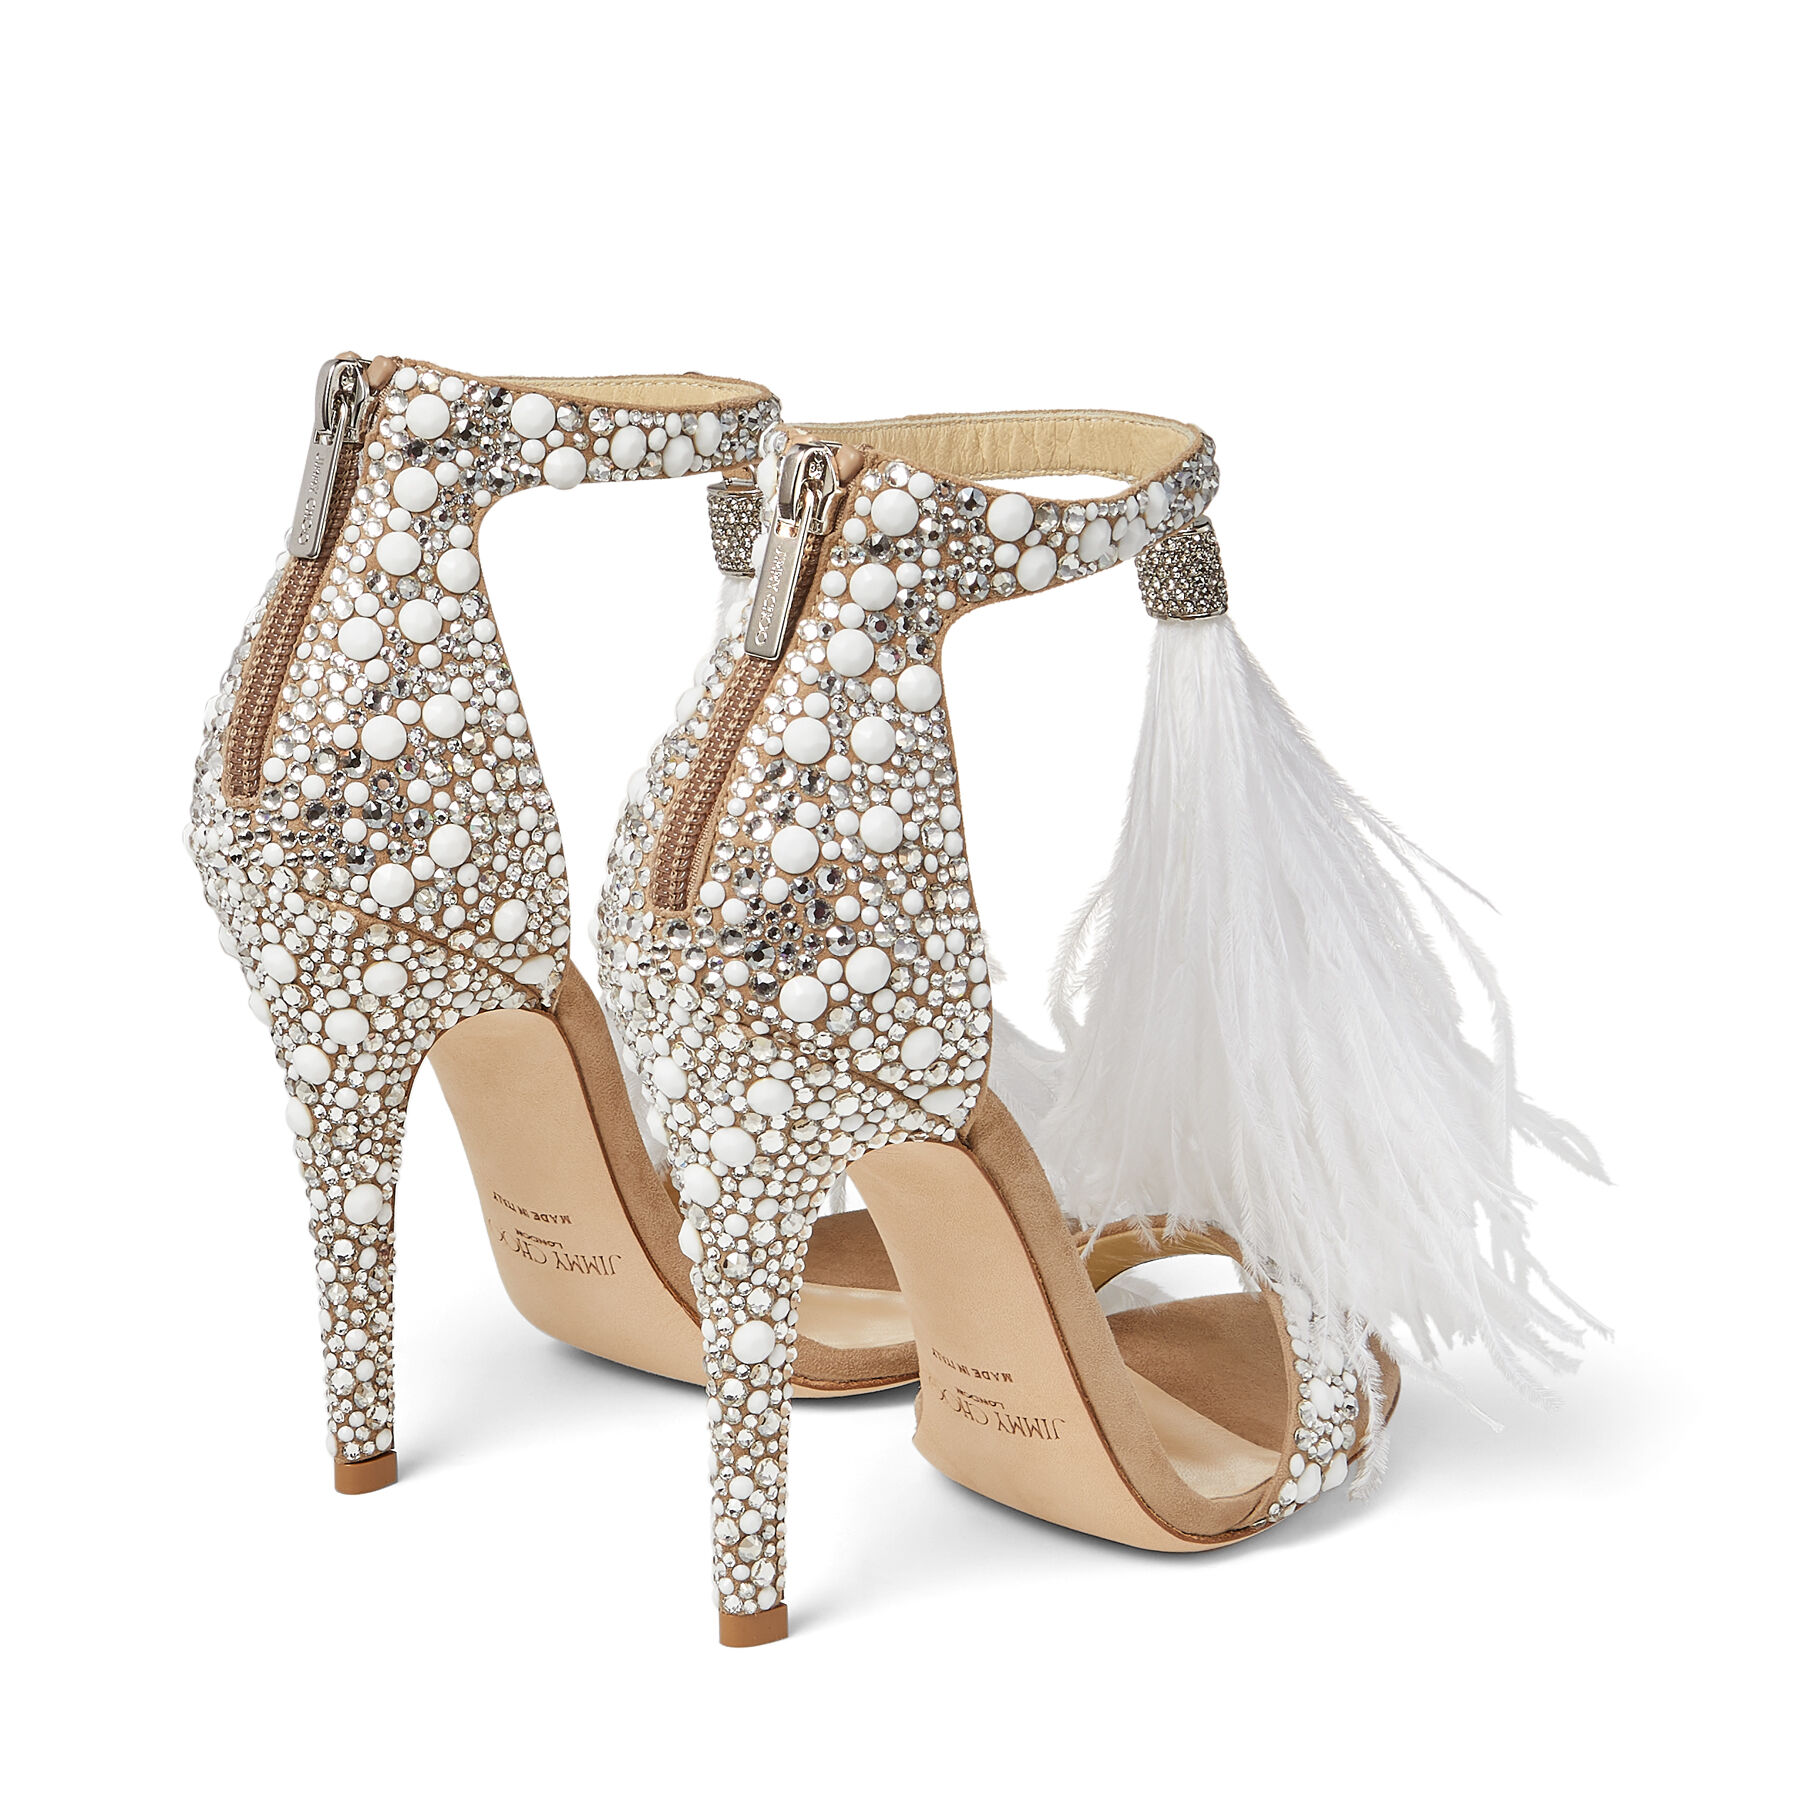 White Suede and Hot Fix Crystal Embellished Sandals with an 